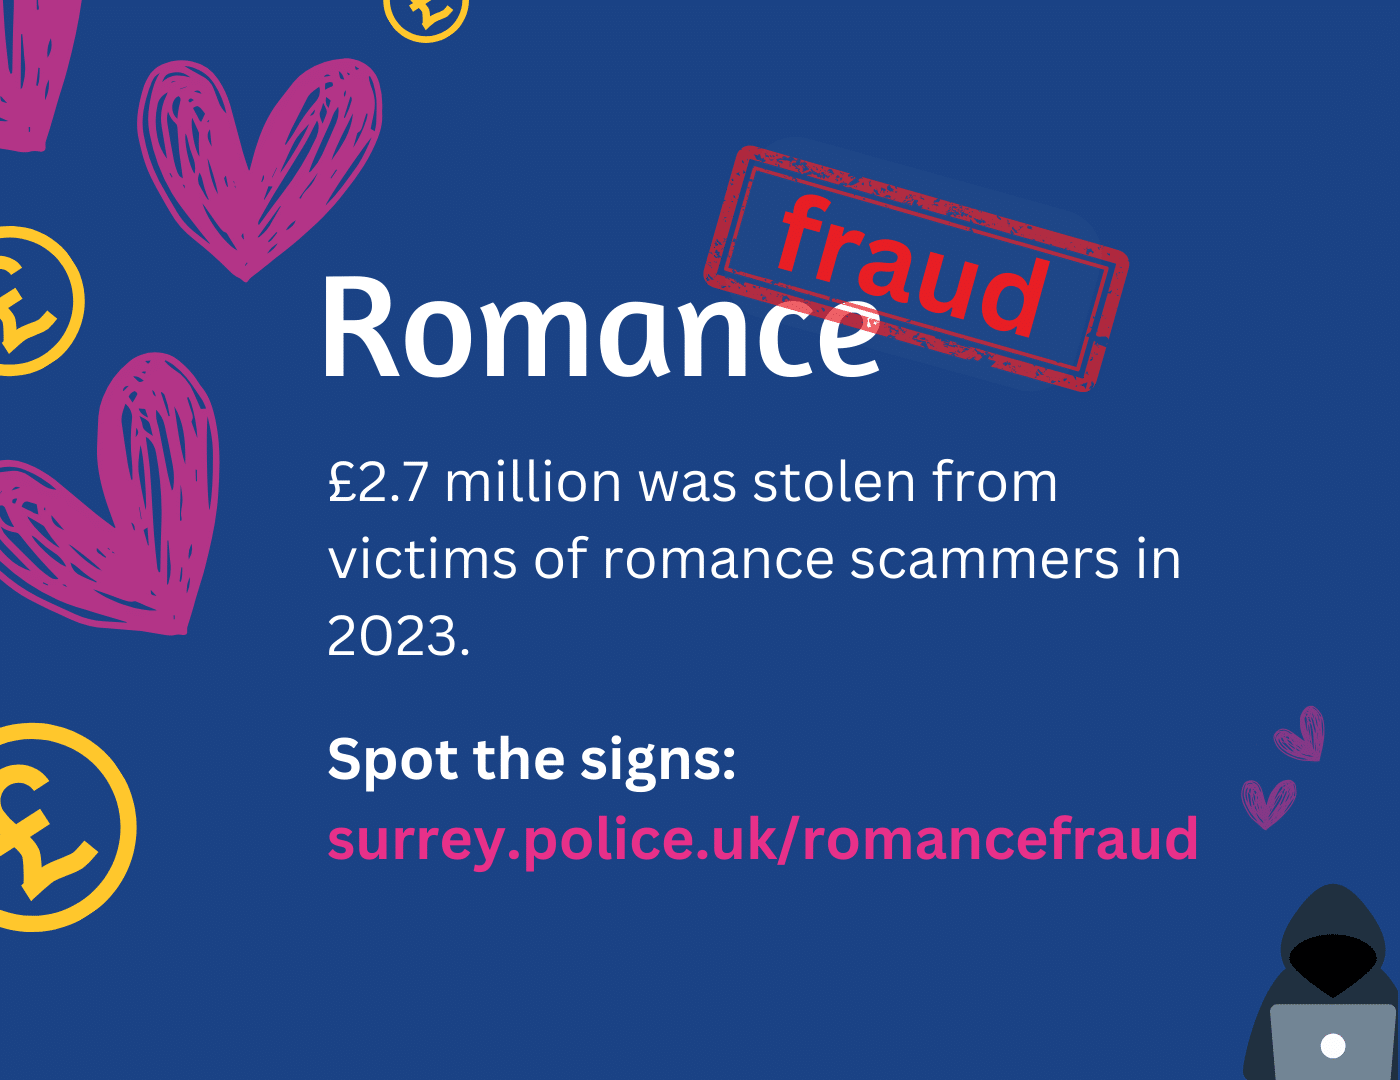 basic romance fraud image says £2.7m was stolen from victims of romance scammers in 2023. Spot the signs.